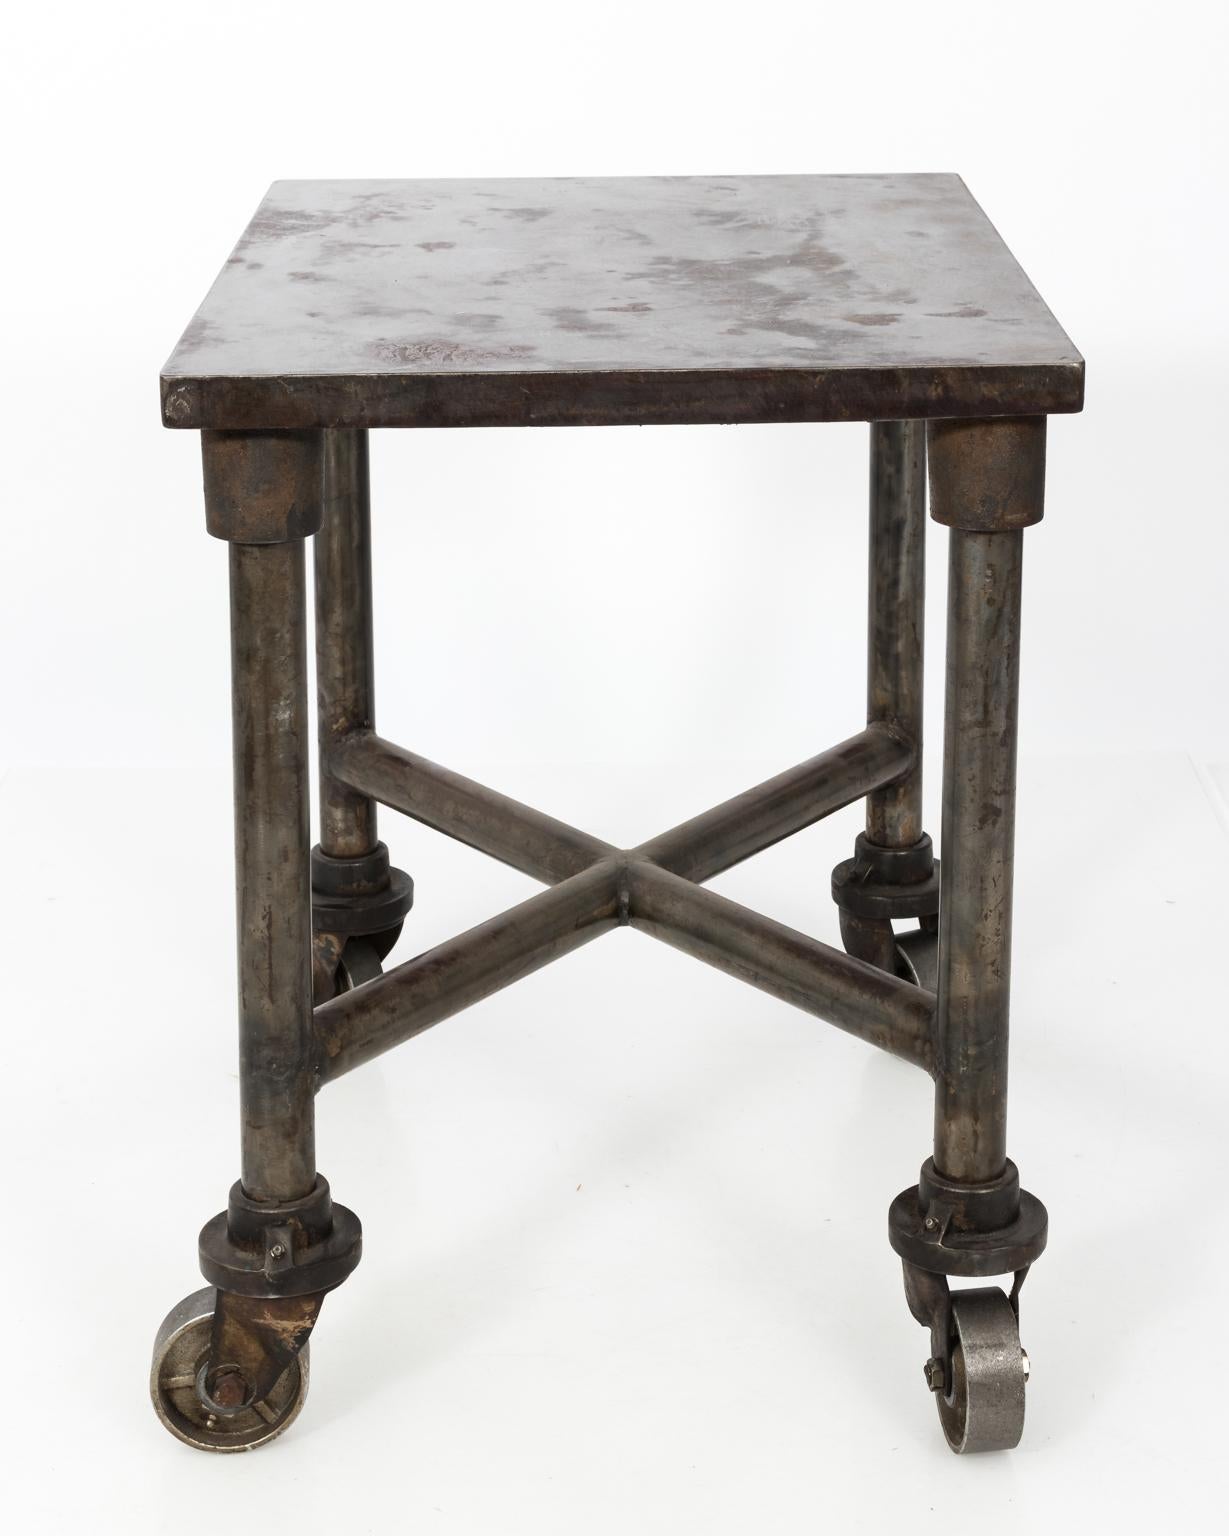 Early 20th century industrial steel side table on large castors.